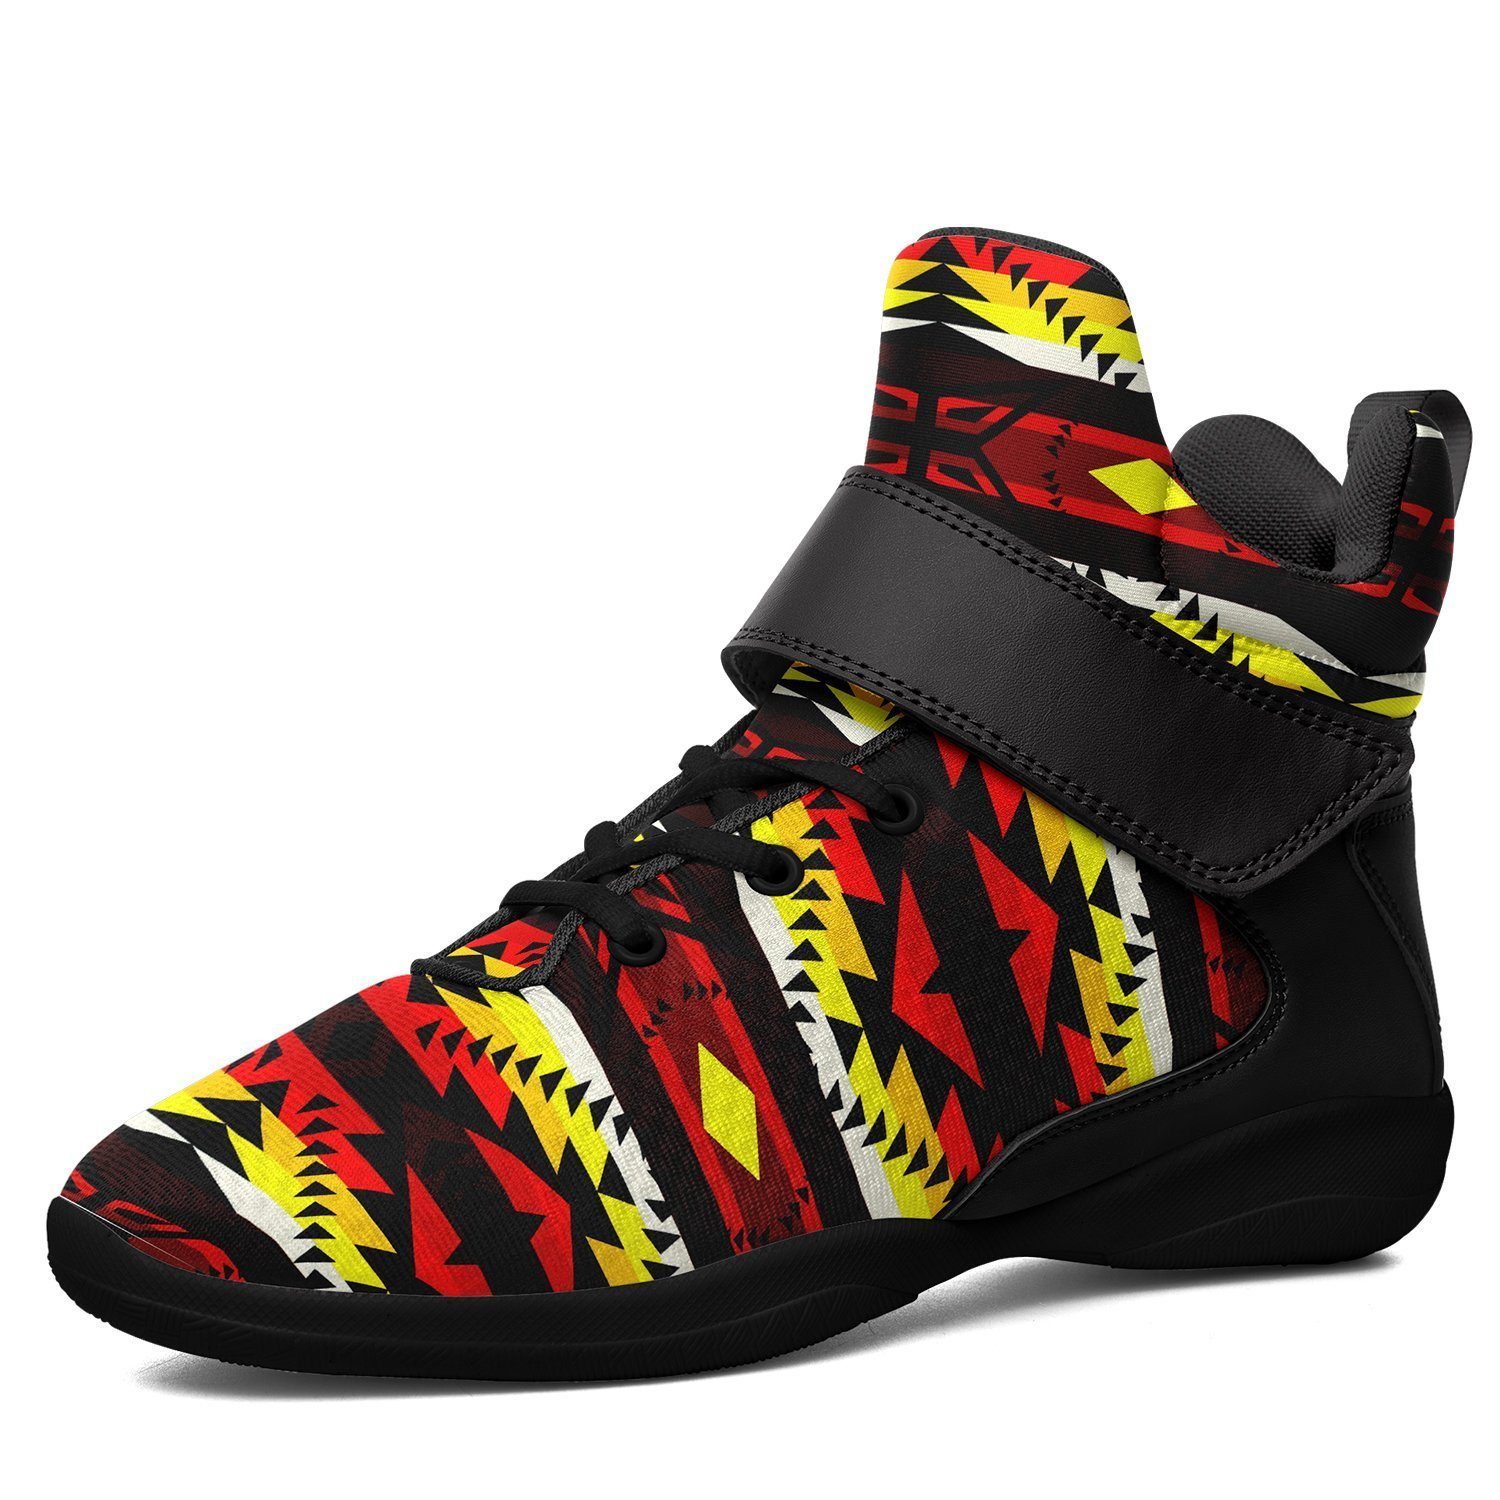 Canyon War Party Ipottaa Basketball / Sport High Top Shoes - Black Sole 49 Dzine US Men 7 / EUR 40 Black Sole with Black Strap 